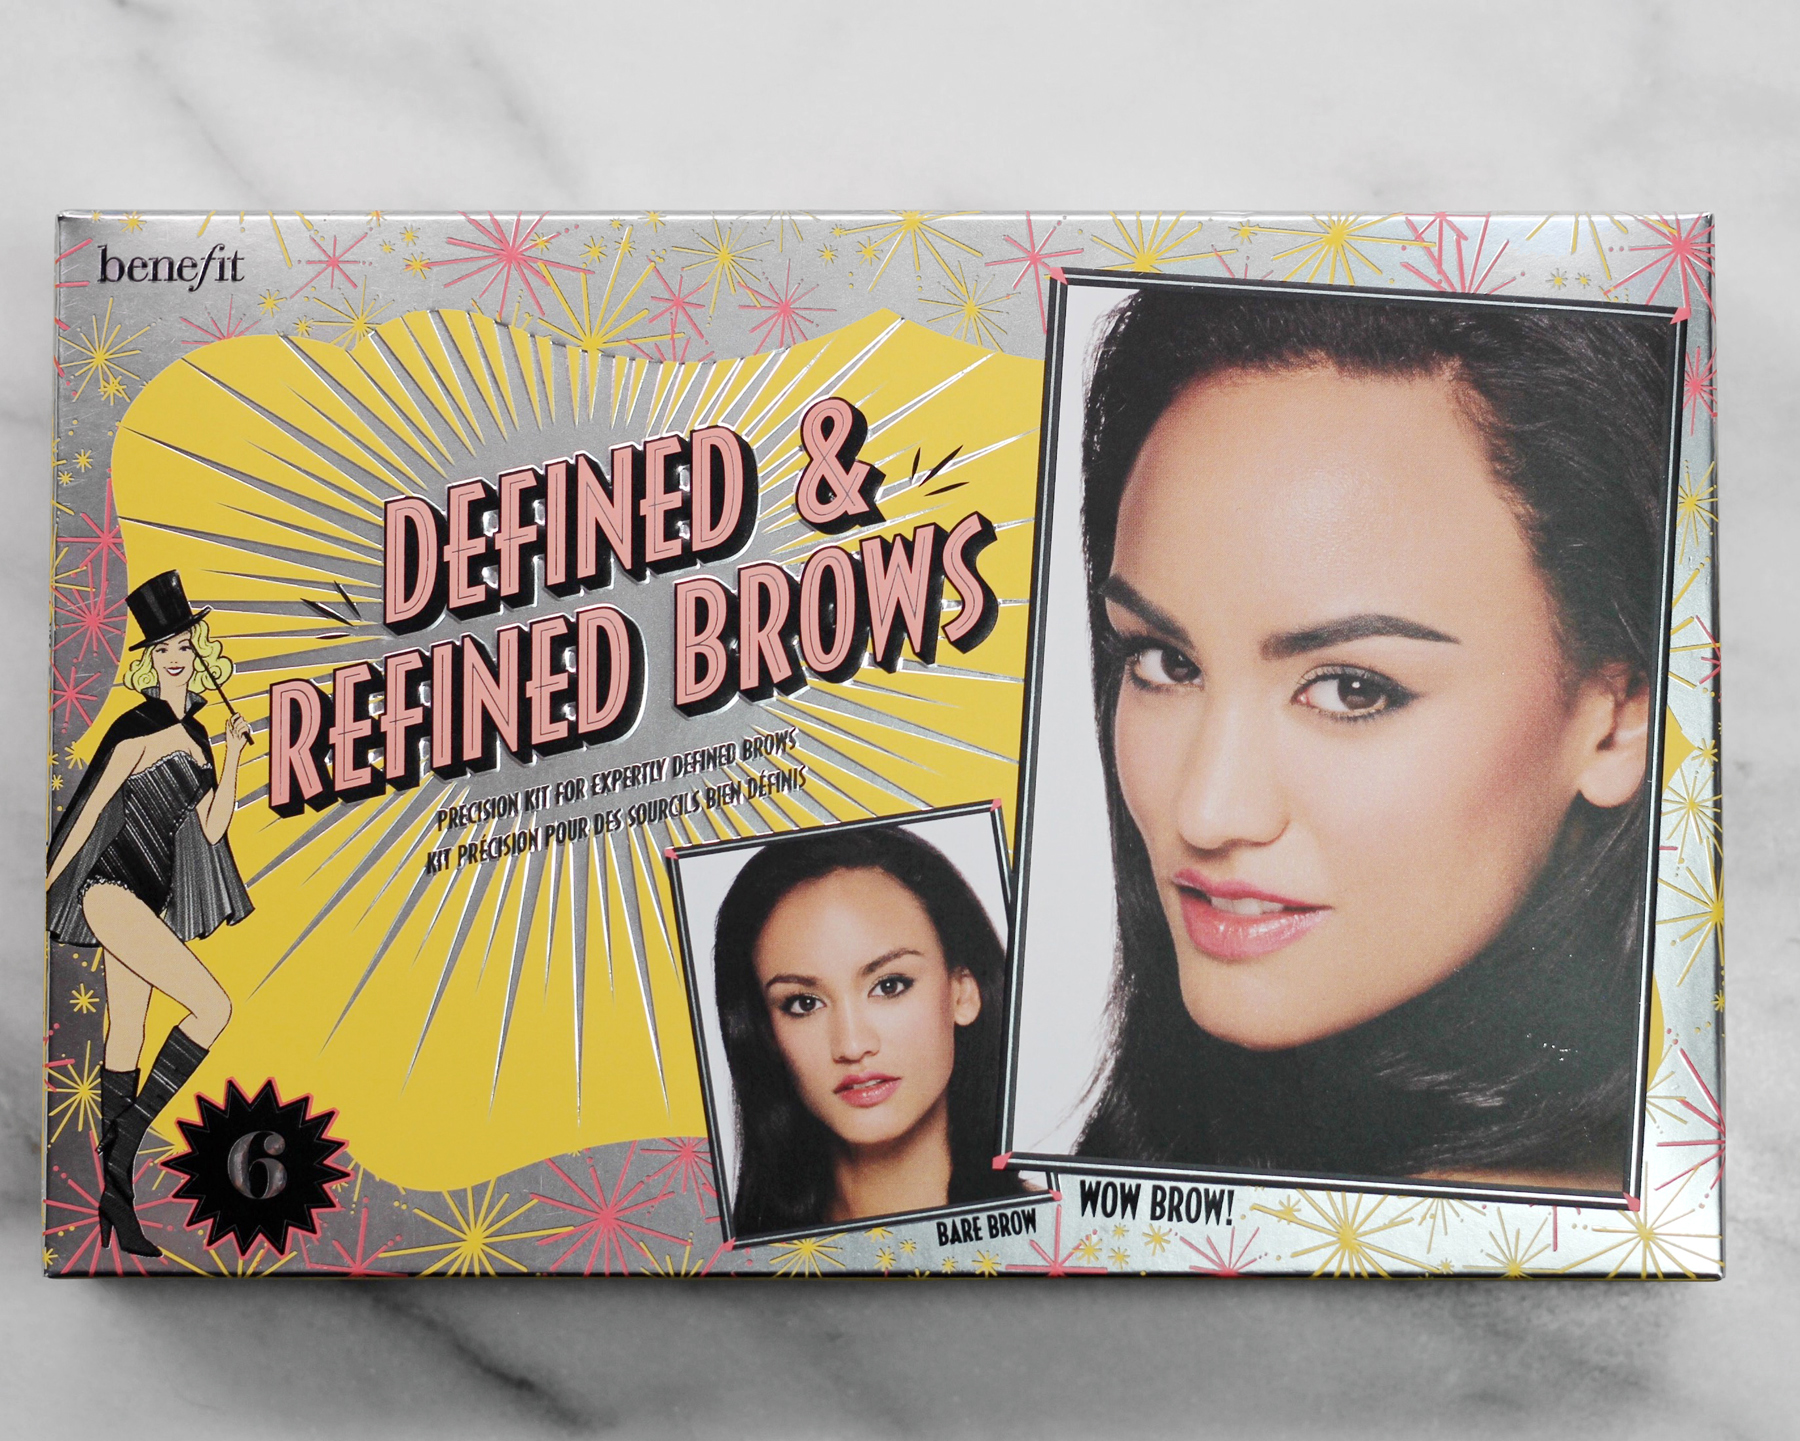 BENEFIT'S NEWEST SETS ARE THE PERFECT HOLIDAY GIFT - woahstyle.com_2009.JPG